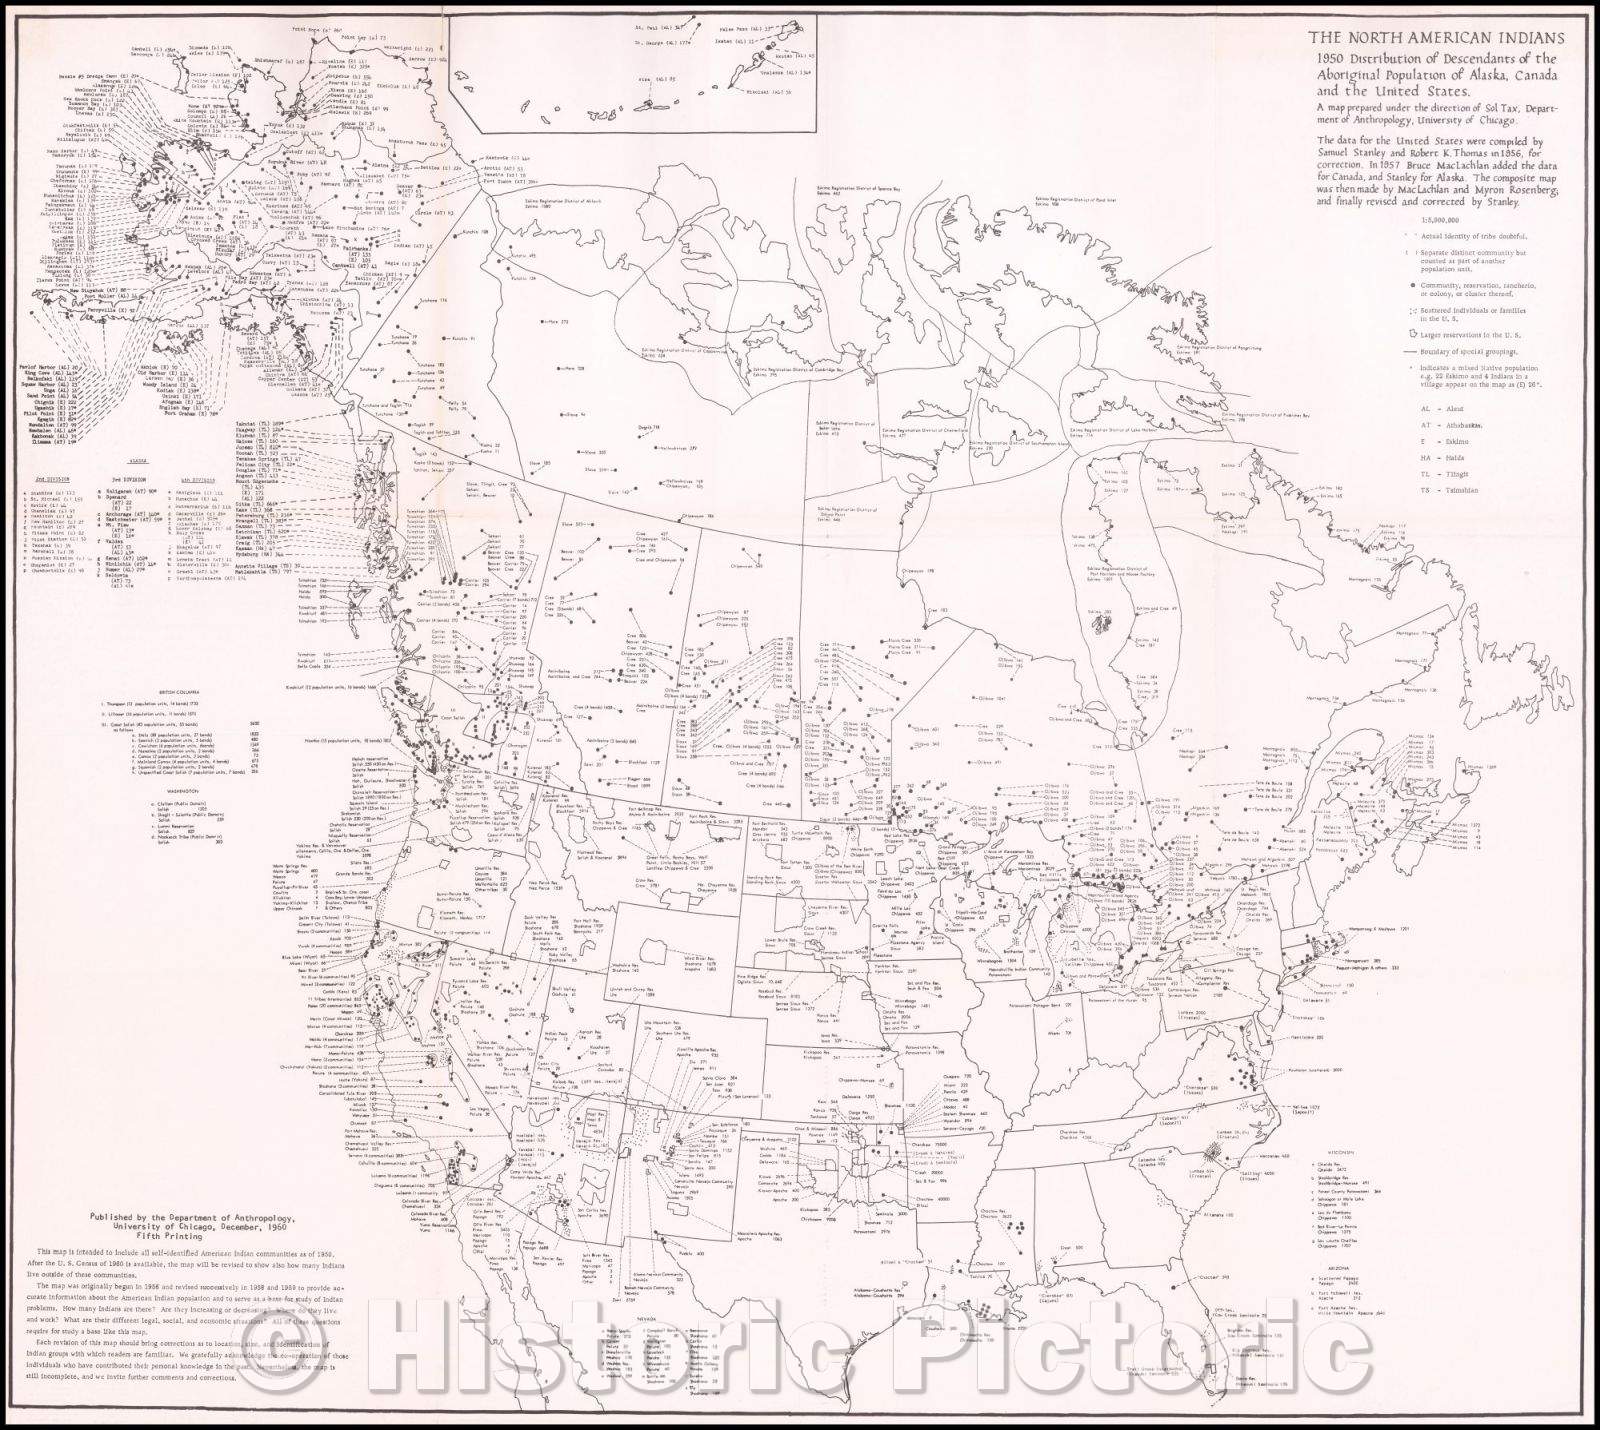 Historic Map - The North American Indians Distribution of Descendants of the Aboriginal Population of Alaska, Canada and the United States, 1956, Sol Tax - Vintage Wall Art